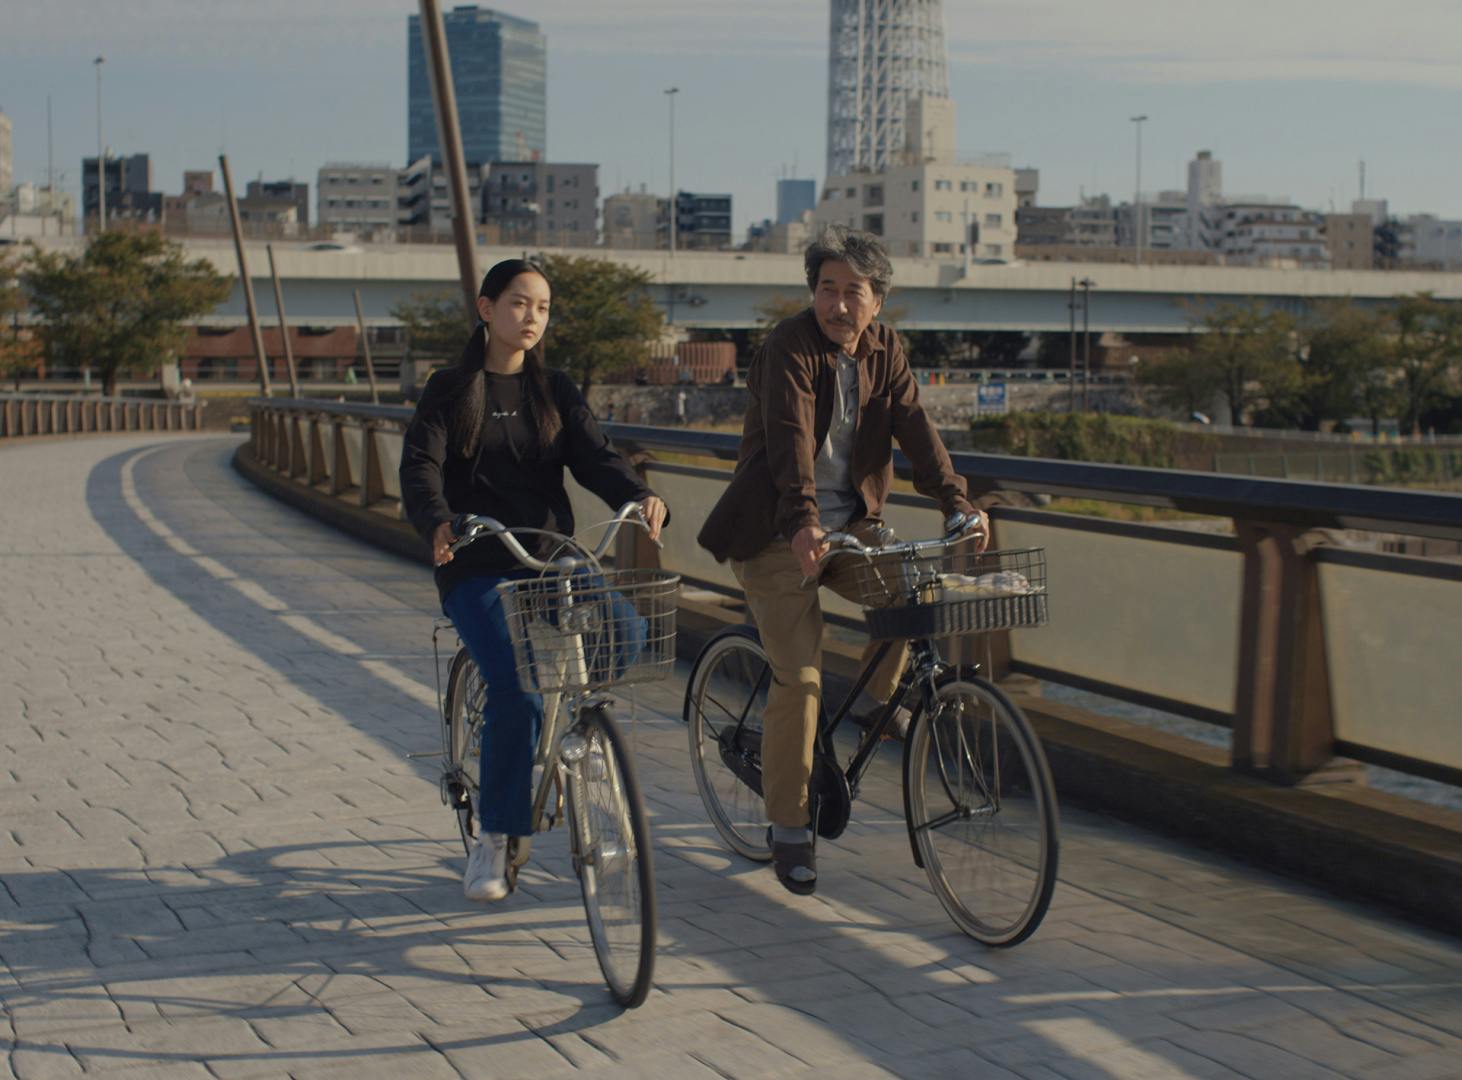 Film still from Perfect Days showing main character Hirayama and his niece riding bikes over a bridge